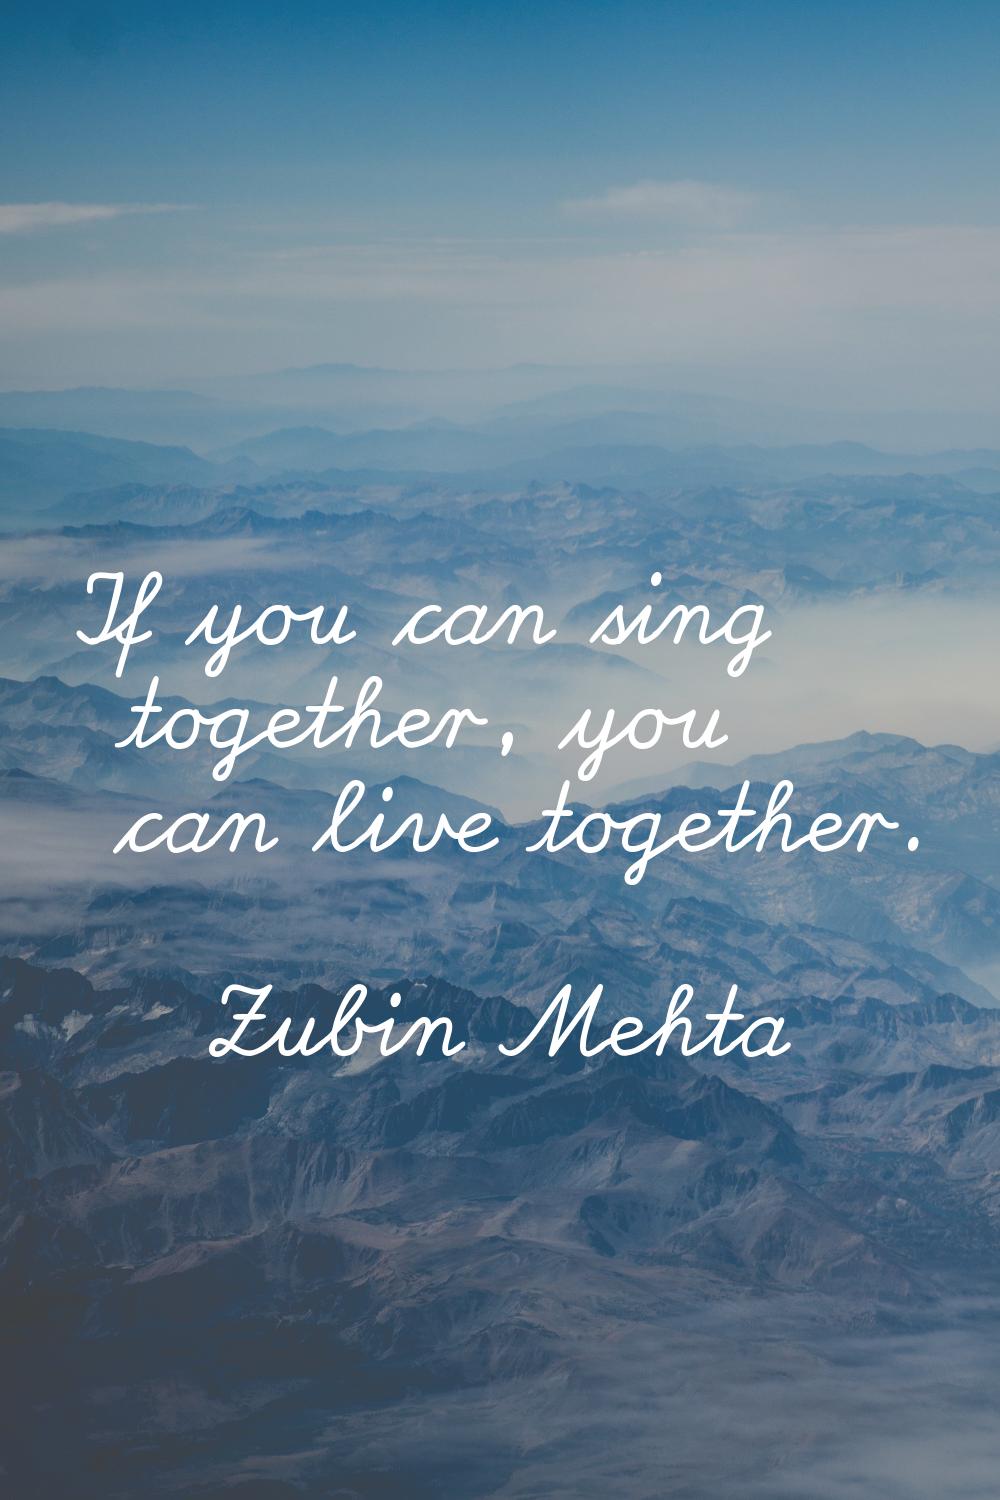 If you can sing together, you can live together.